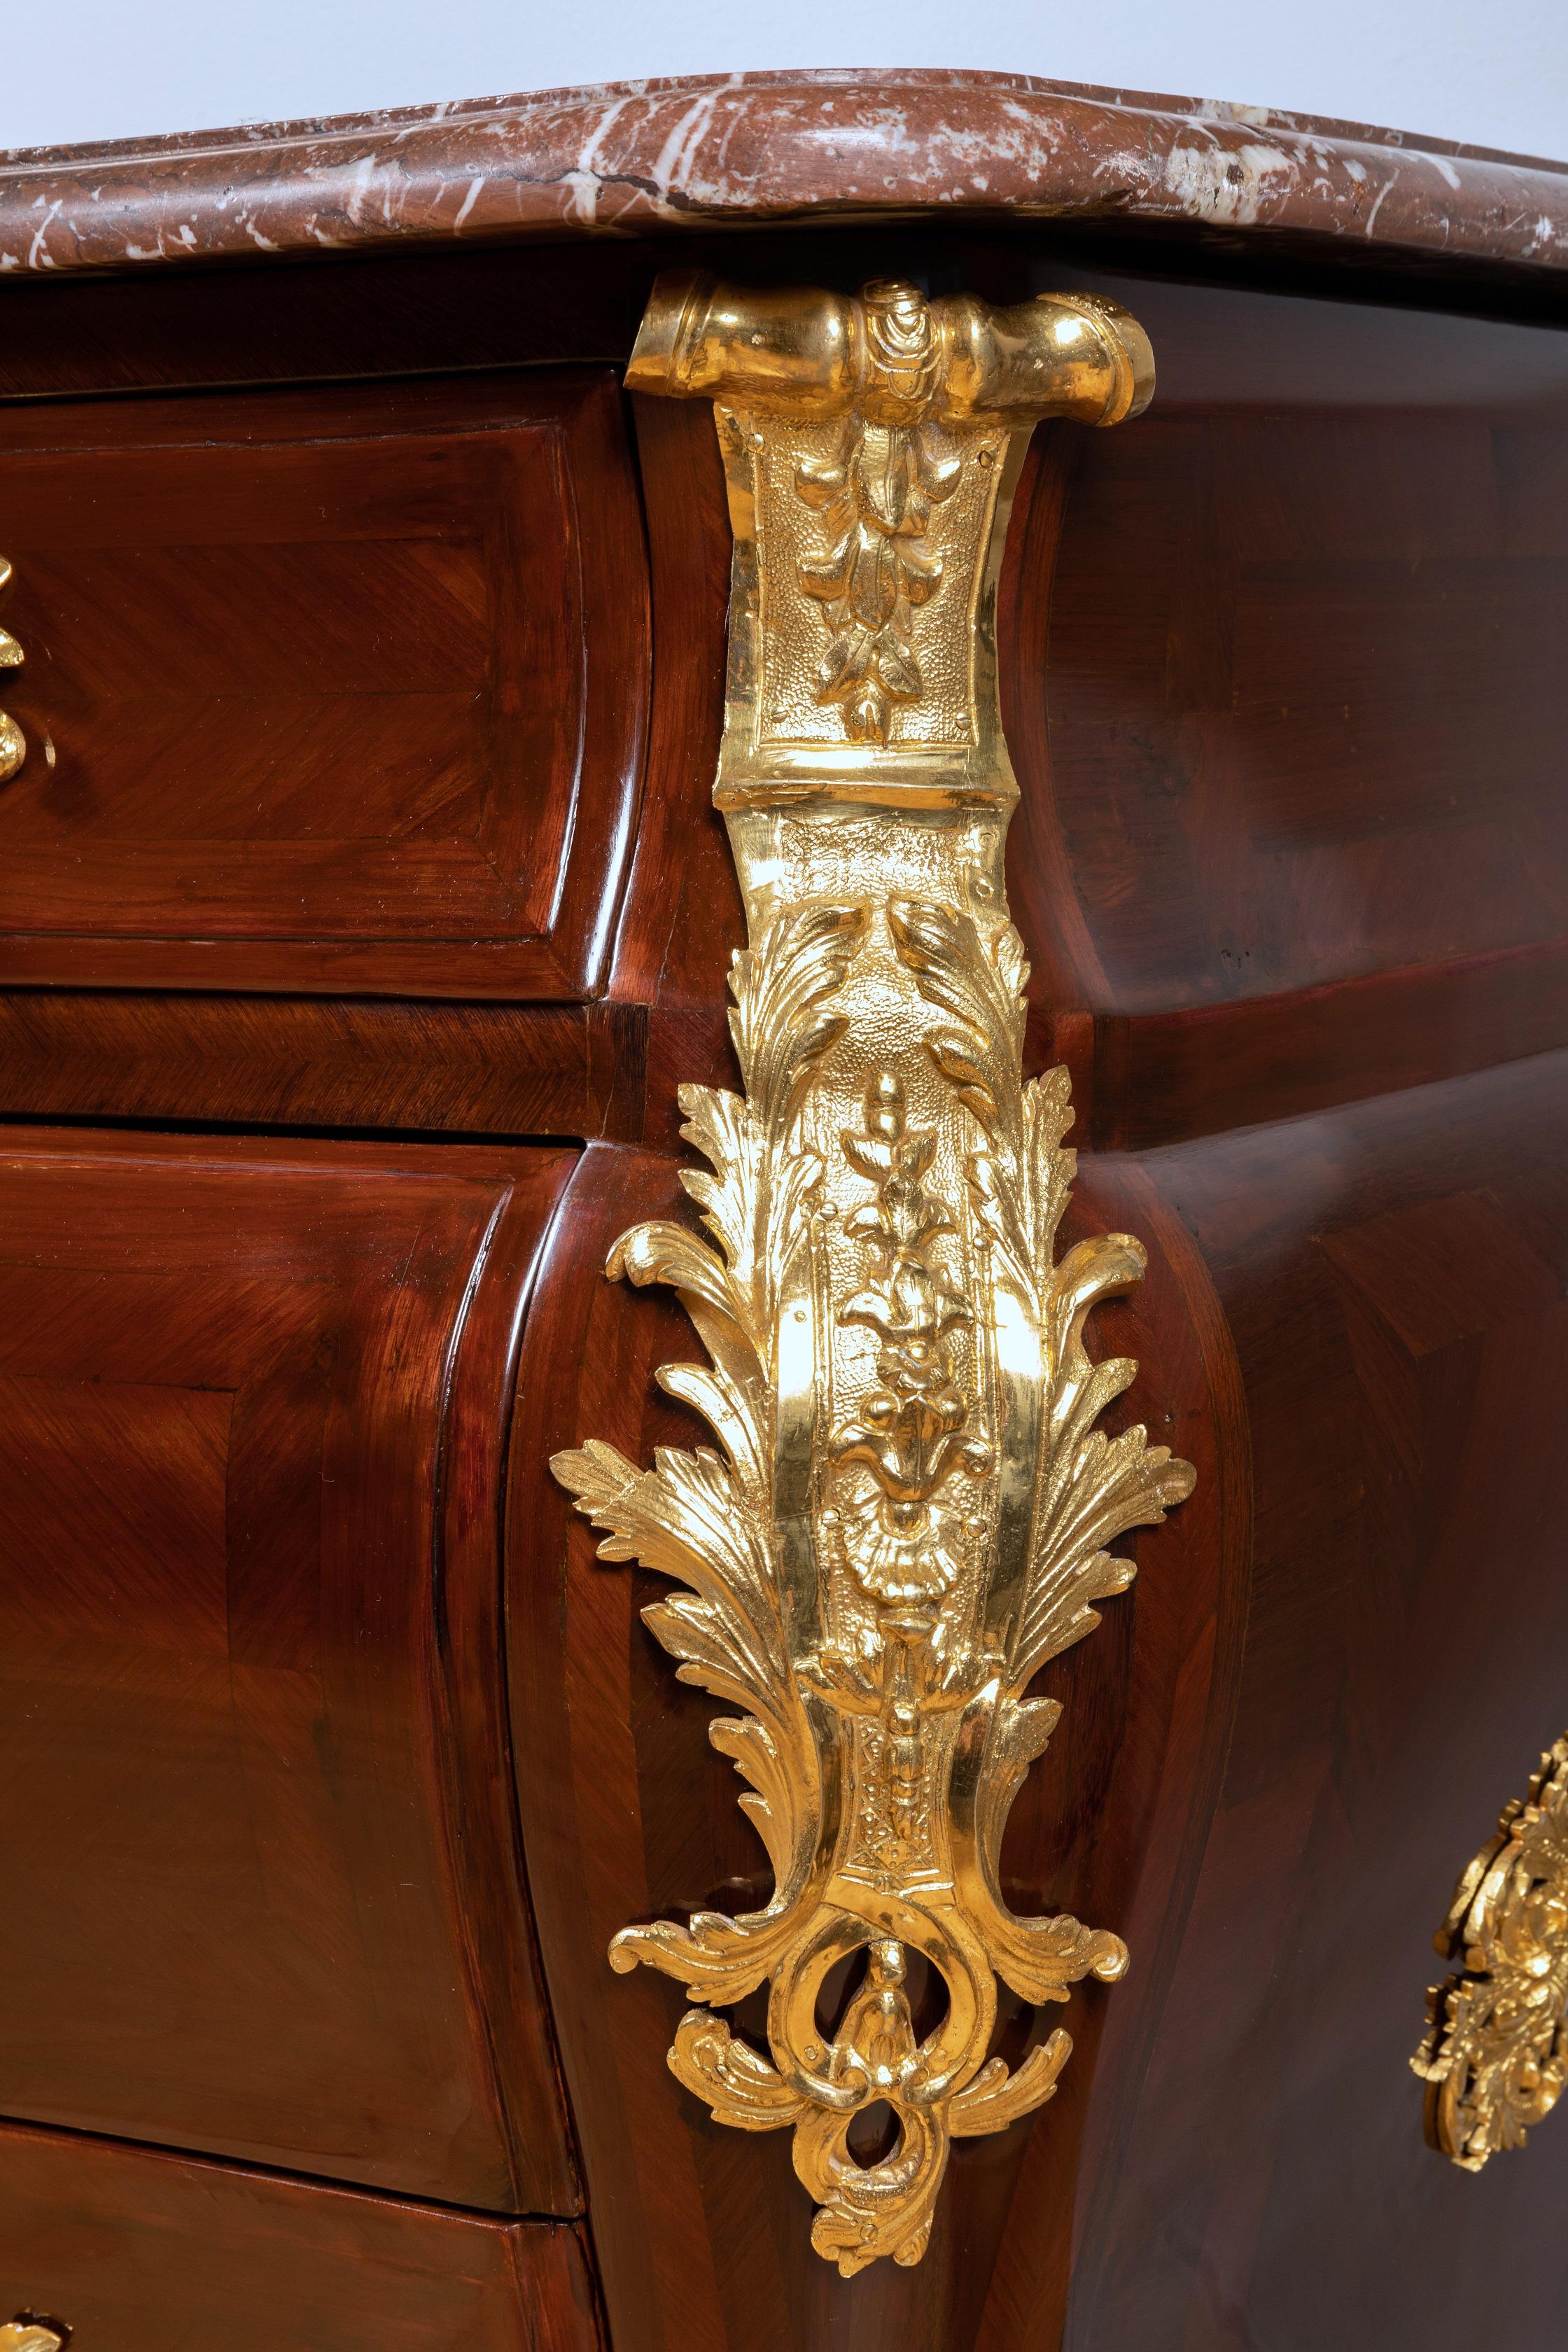 French 18th Century Regence Ormolu-Mounted Commode by Etienne Doirat For Sale 2